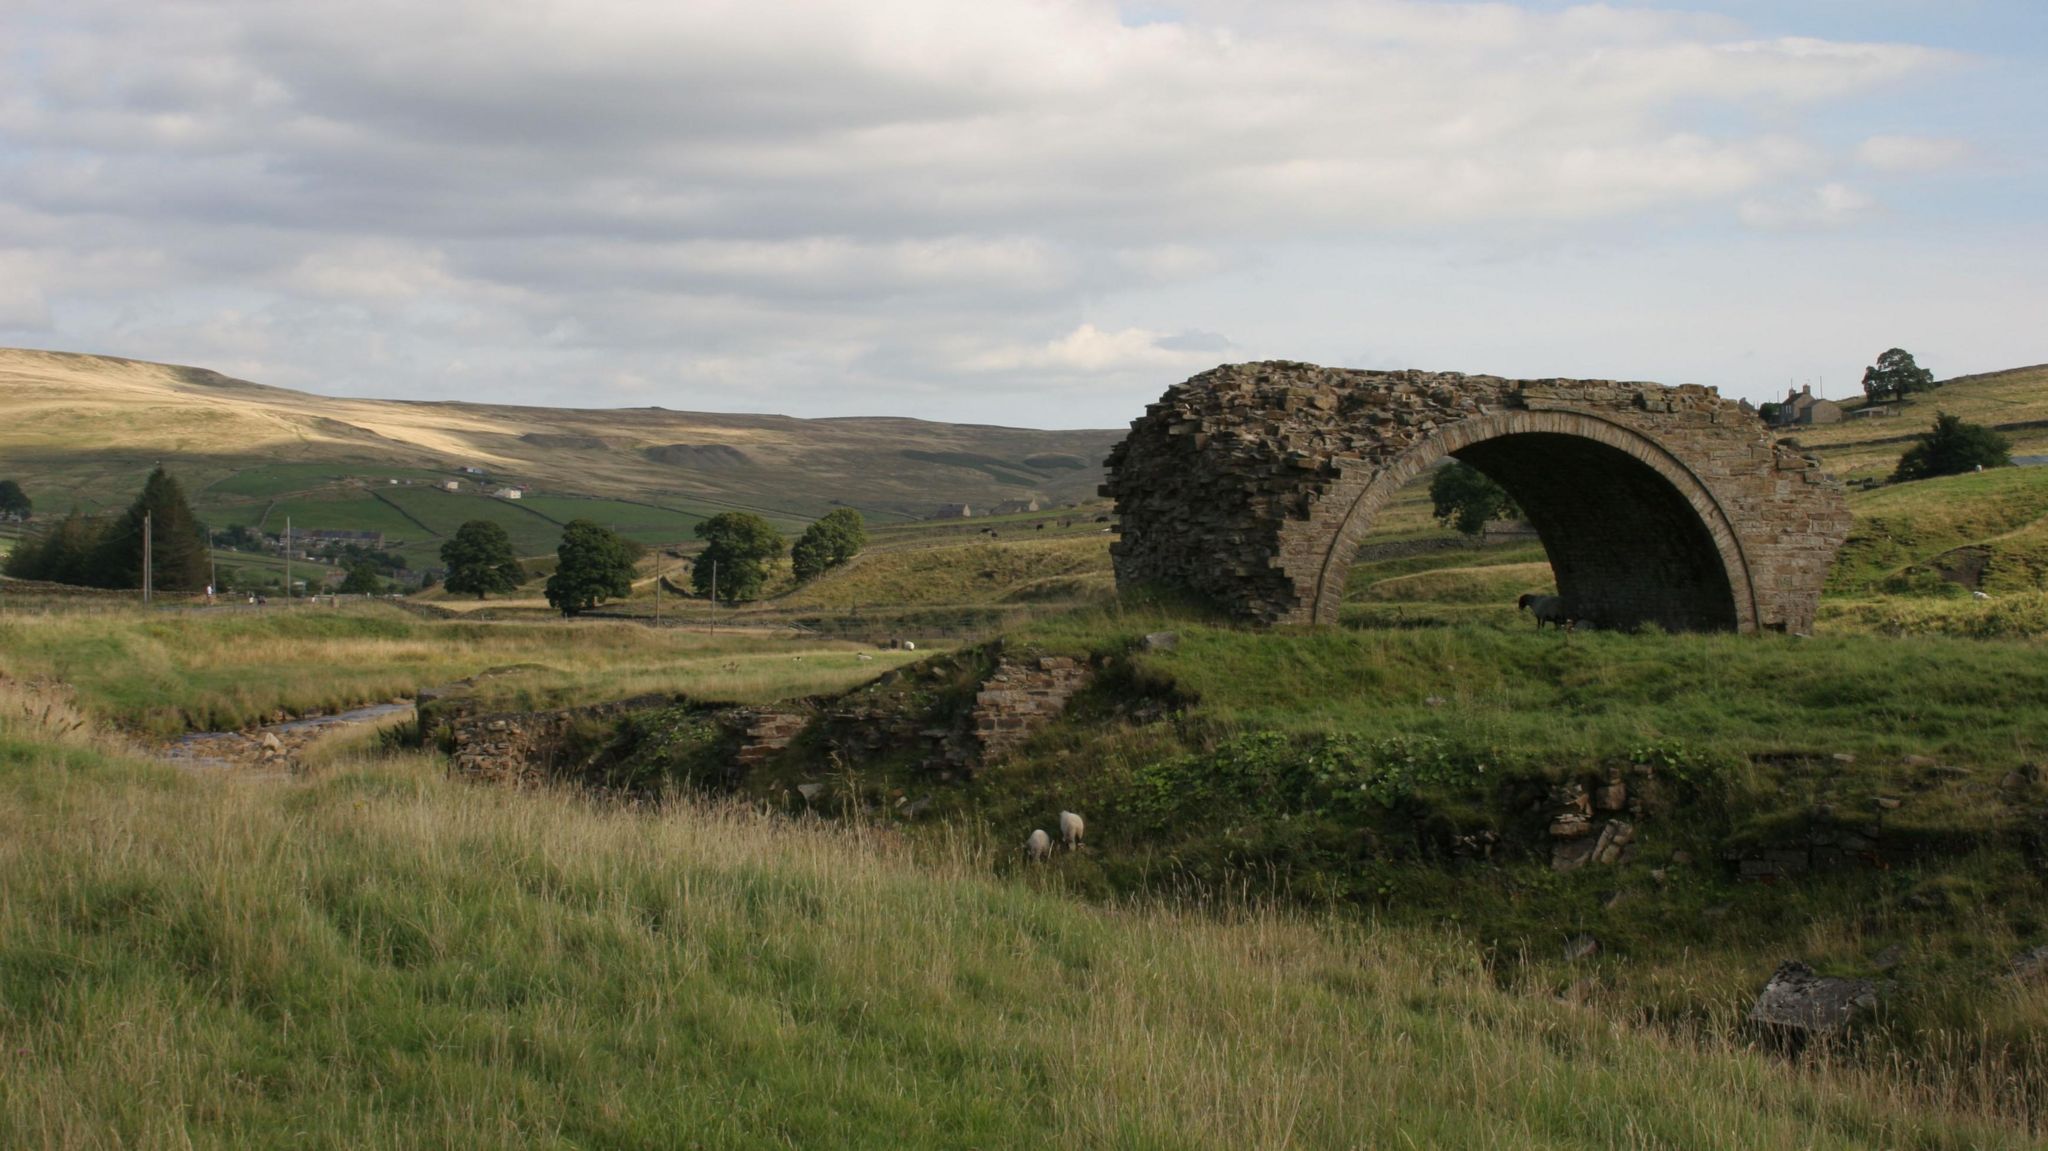 A single archway in a wide empty moorland landscape